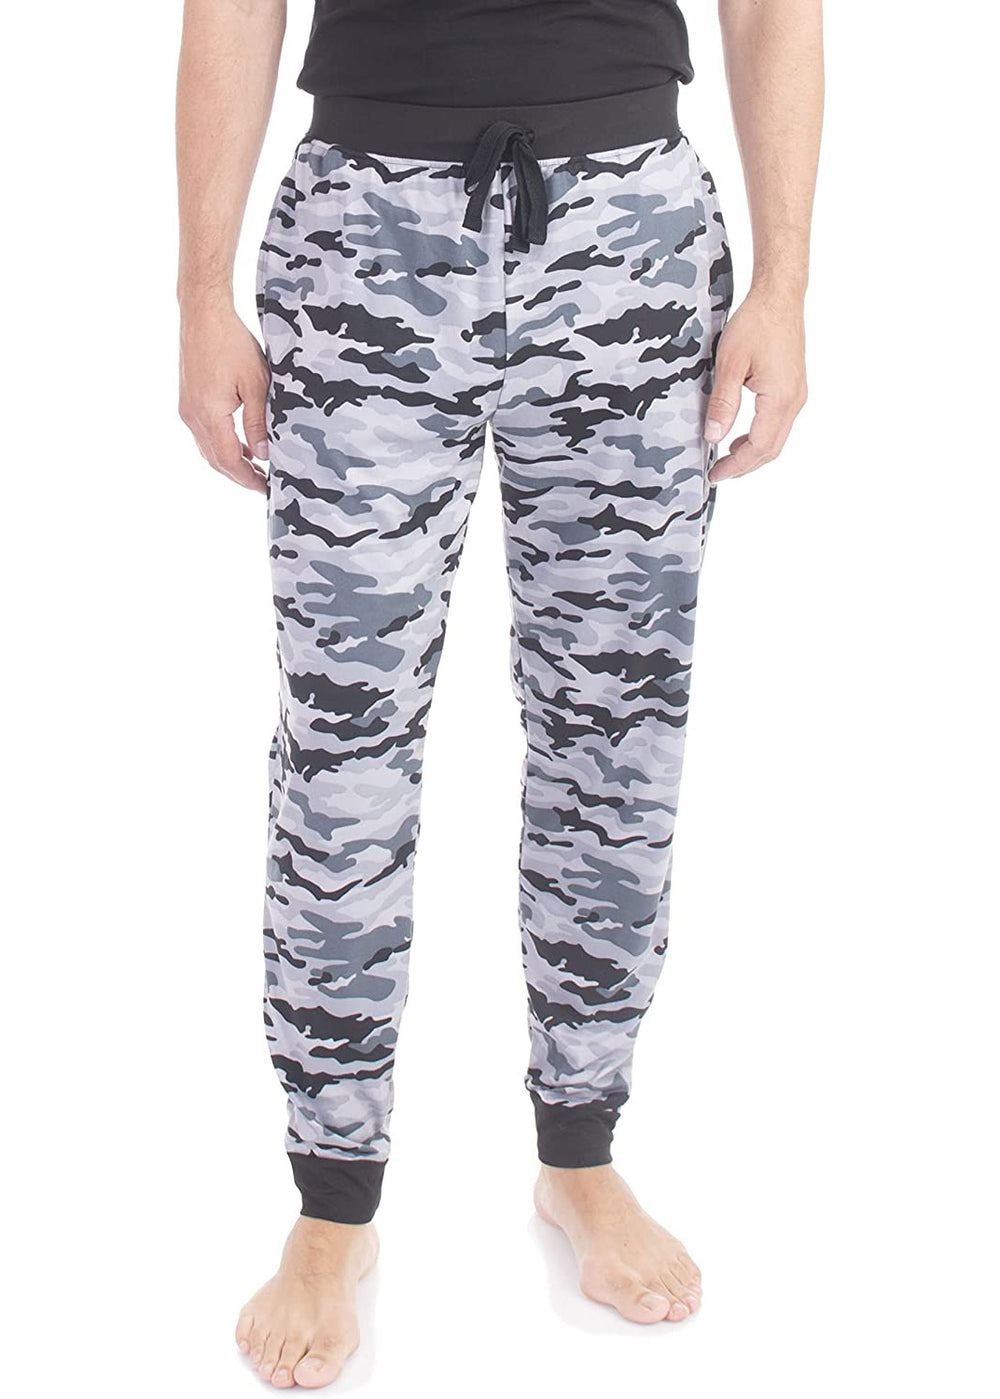 PJ joggers with soft velvety texture, stretch, elastic waistband, drawstring, and stylish ankle cuff. This pattern is a grey, black and white camo pattern. The waist and the cuffs are black.